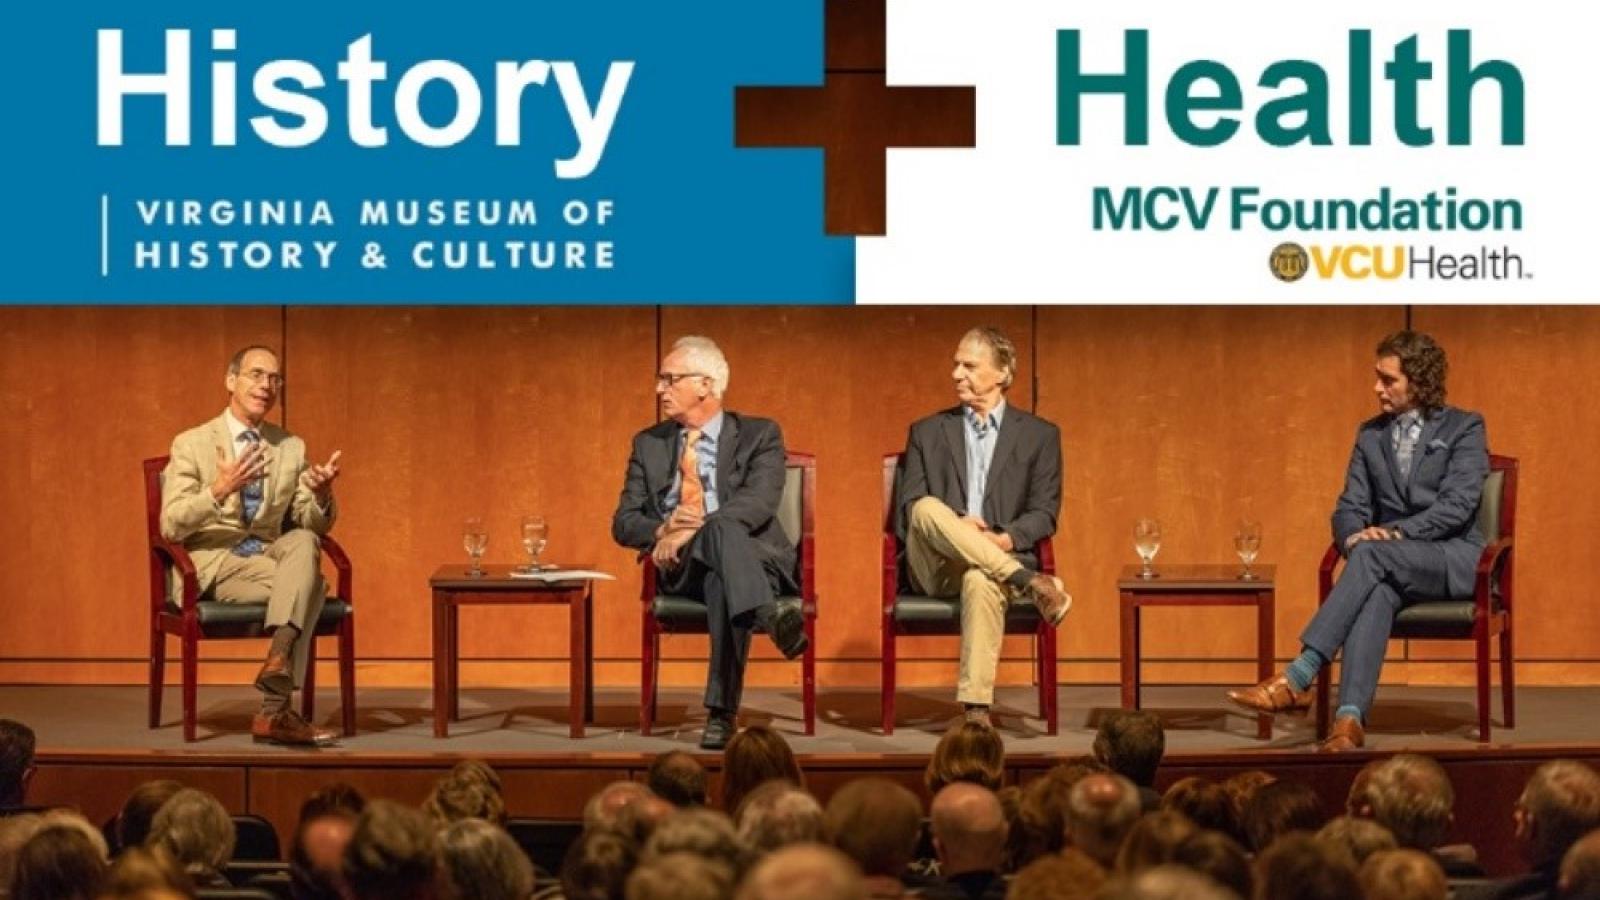 Panel at History + Health Event